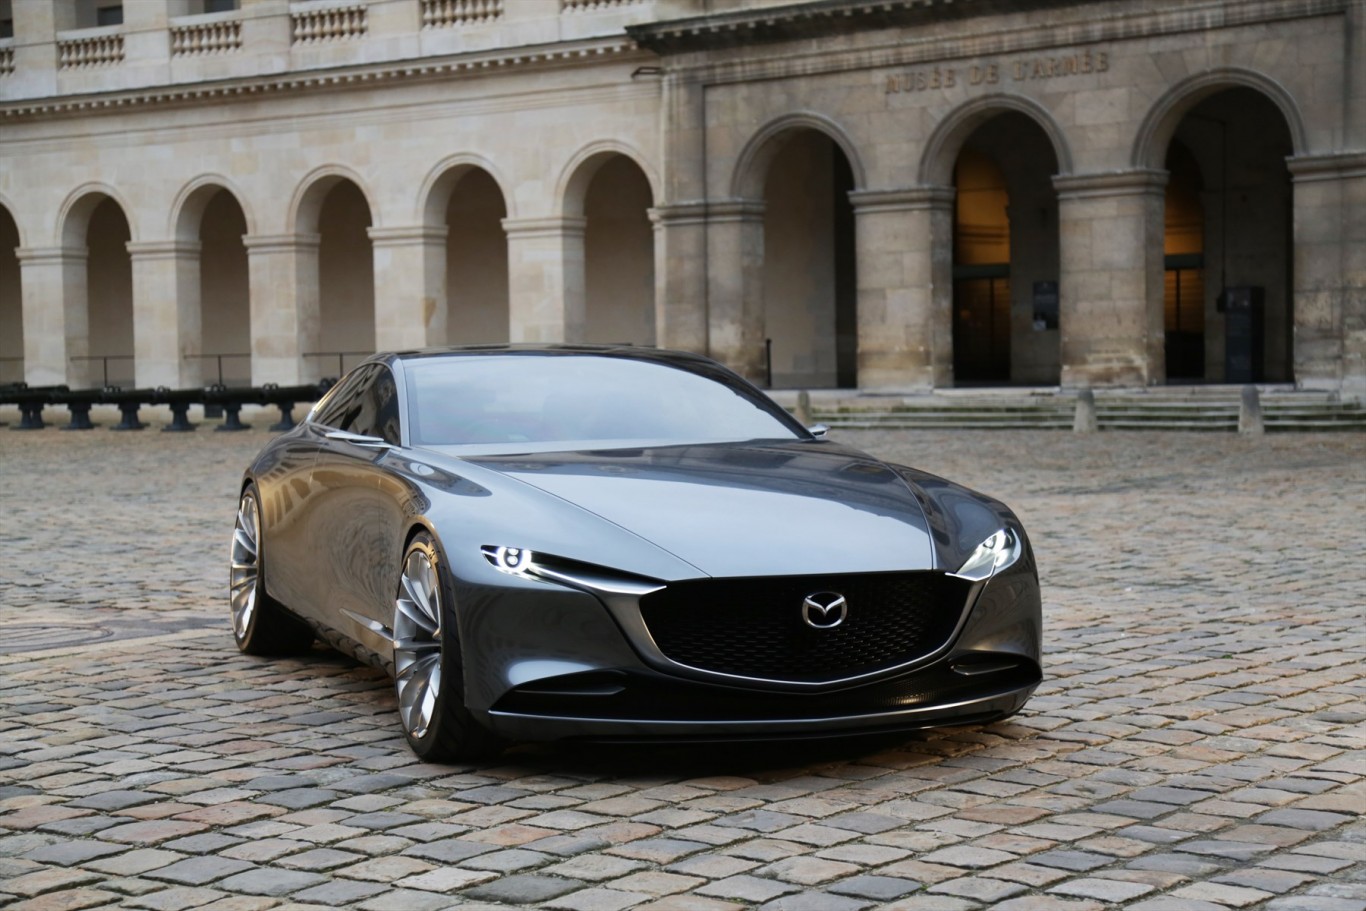 Mazda VISION COUPE wins most beautiful concept award